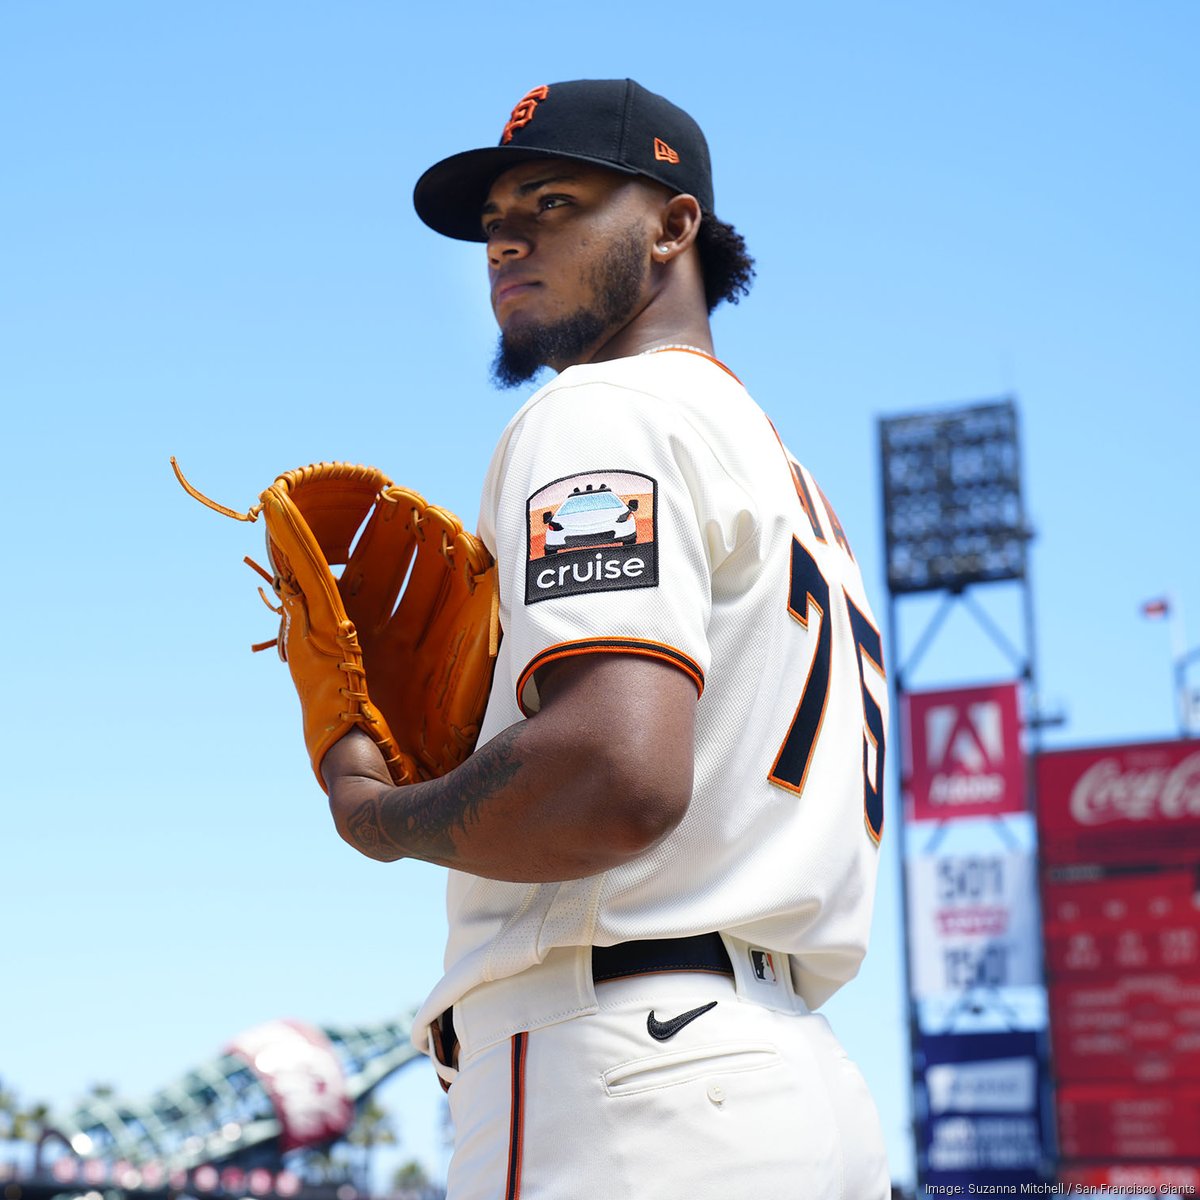 San Francisco Giants drive uniform patch deal with Cruise - San Francisco  Business Times